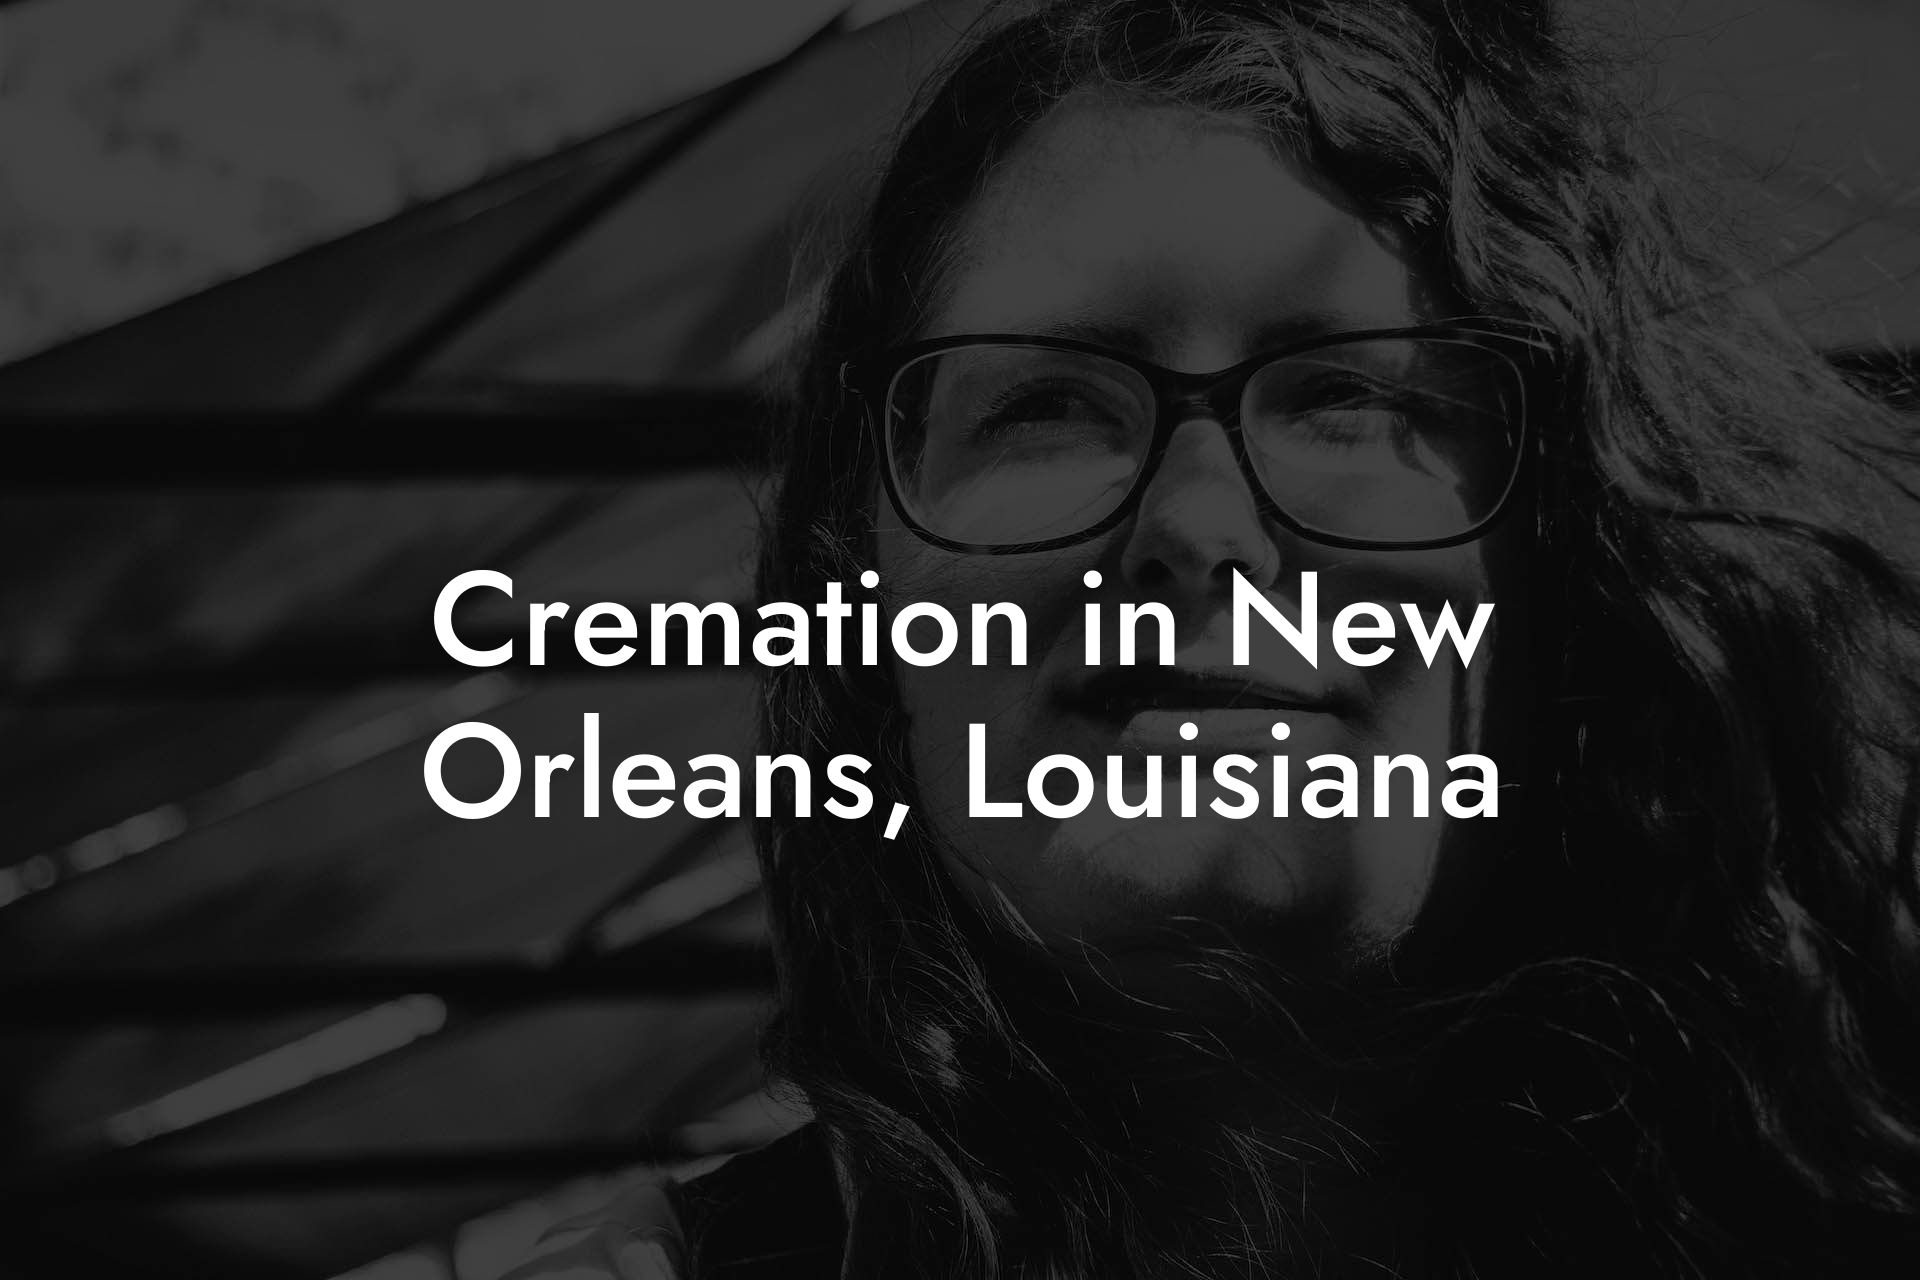 Cremation in New Orleans, Louisiana